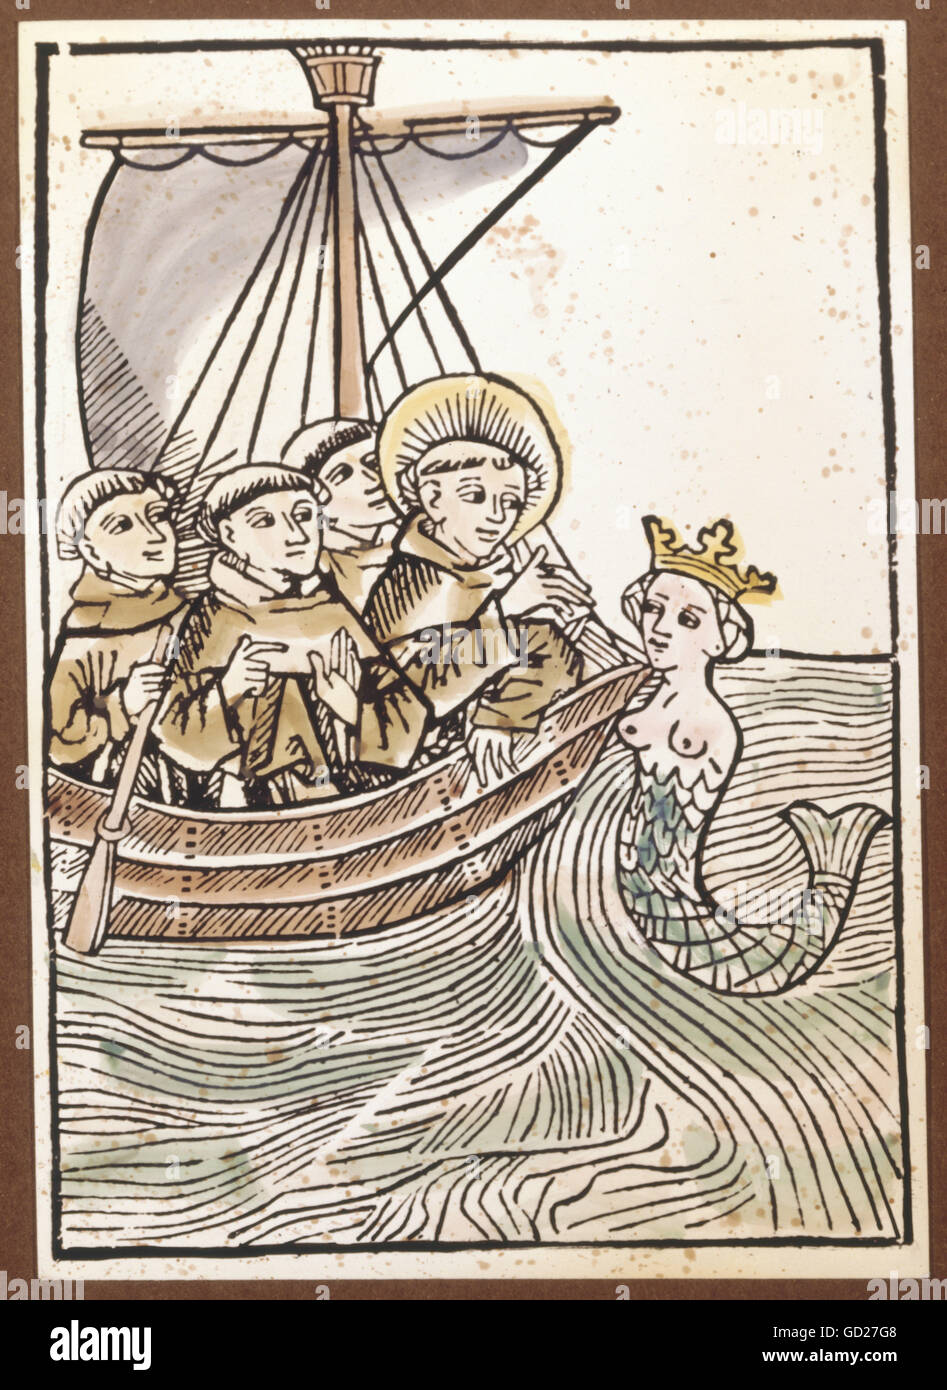 superstition, mythological creature, mermaid, 'The miracolous sea voyage of Saint Brendan', coloured woodcut of the incunabulum edition Basel, printed by Michael Furter, private collection, 1491, Additional-Rights-Clearences-Not Available Stock Photo